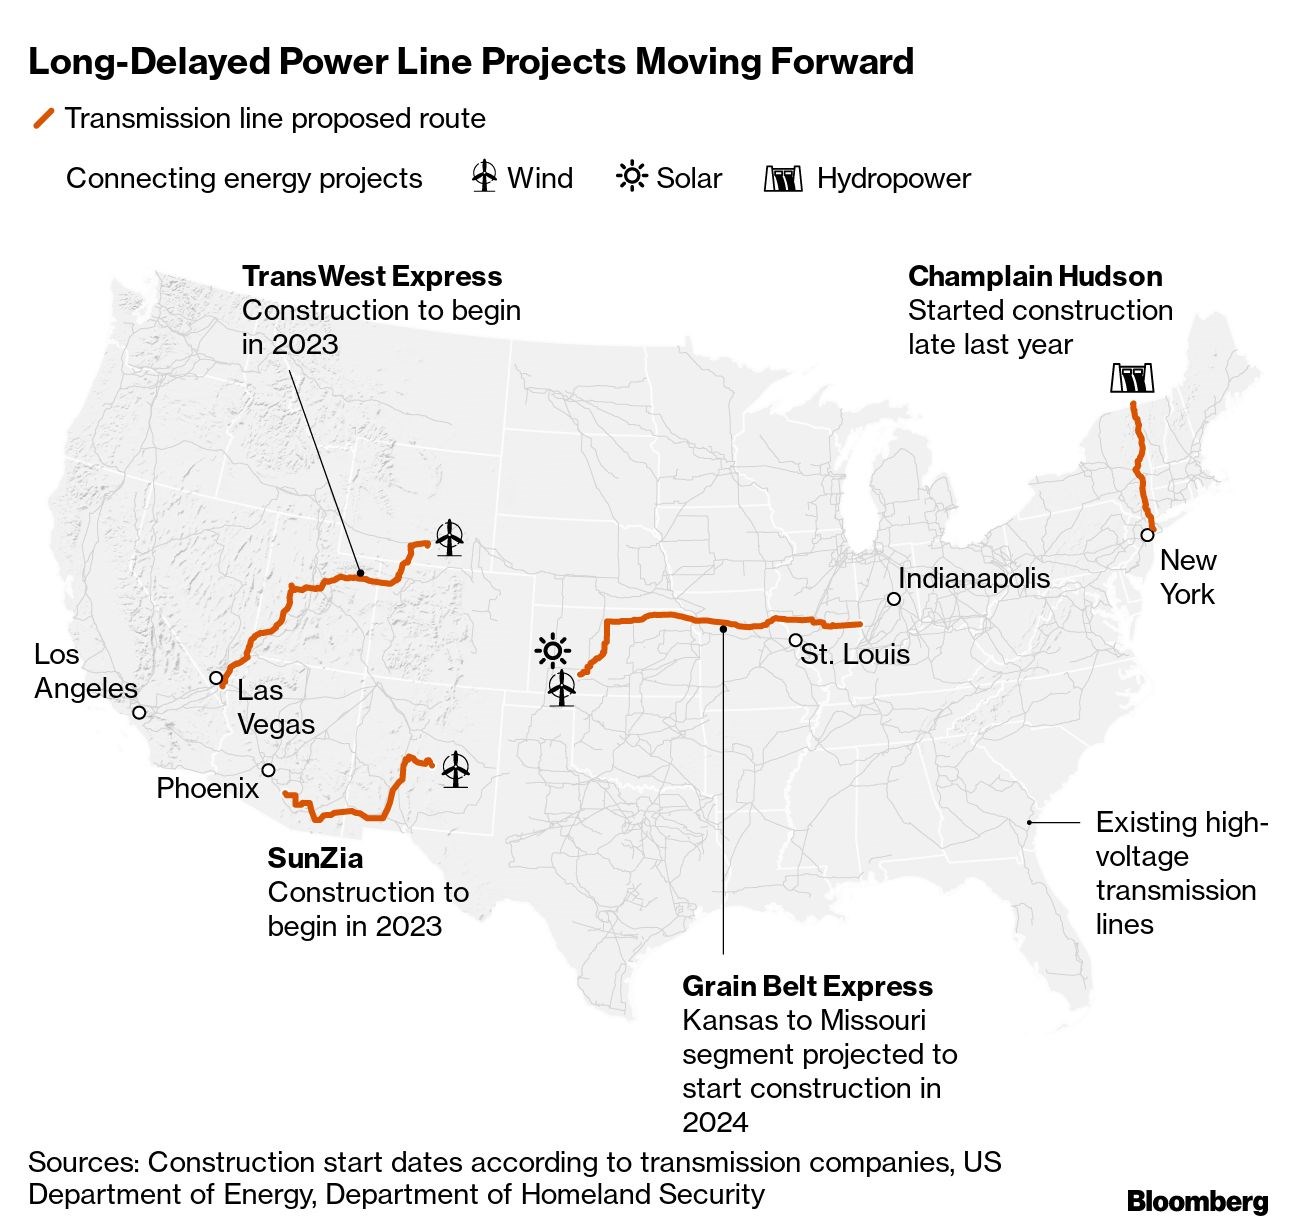 Billion-Dollar Power Lines Finally Inching Ahead to Help US Grids